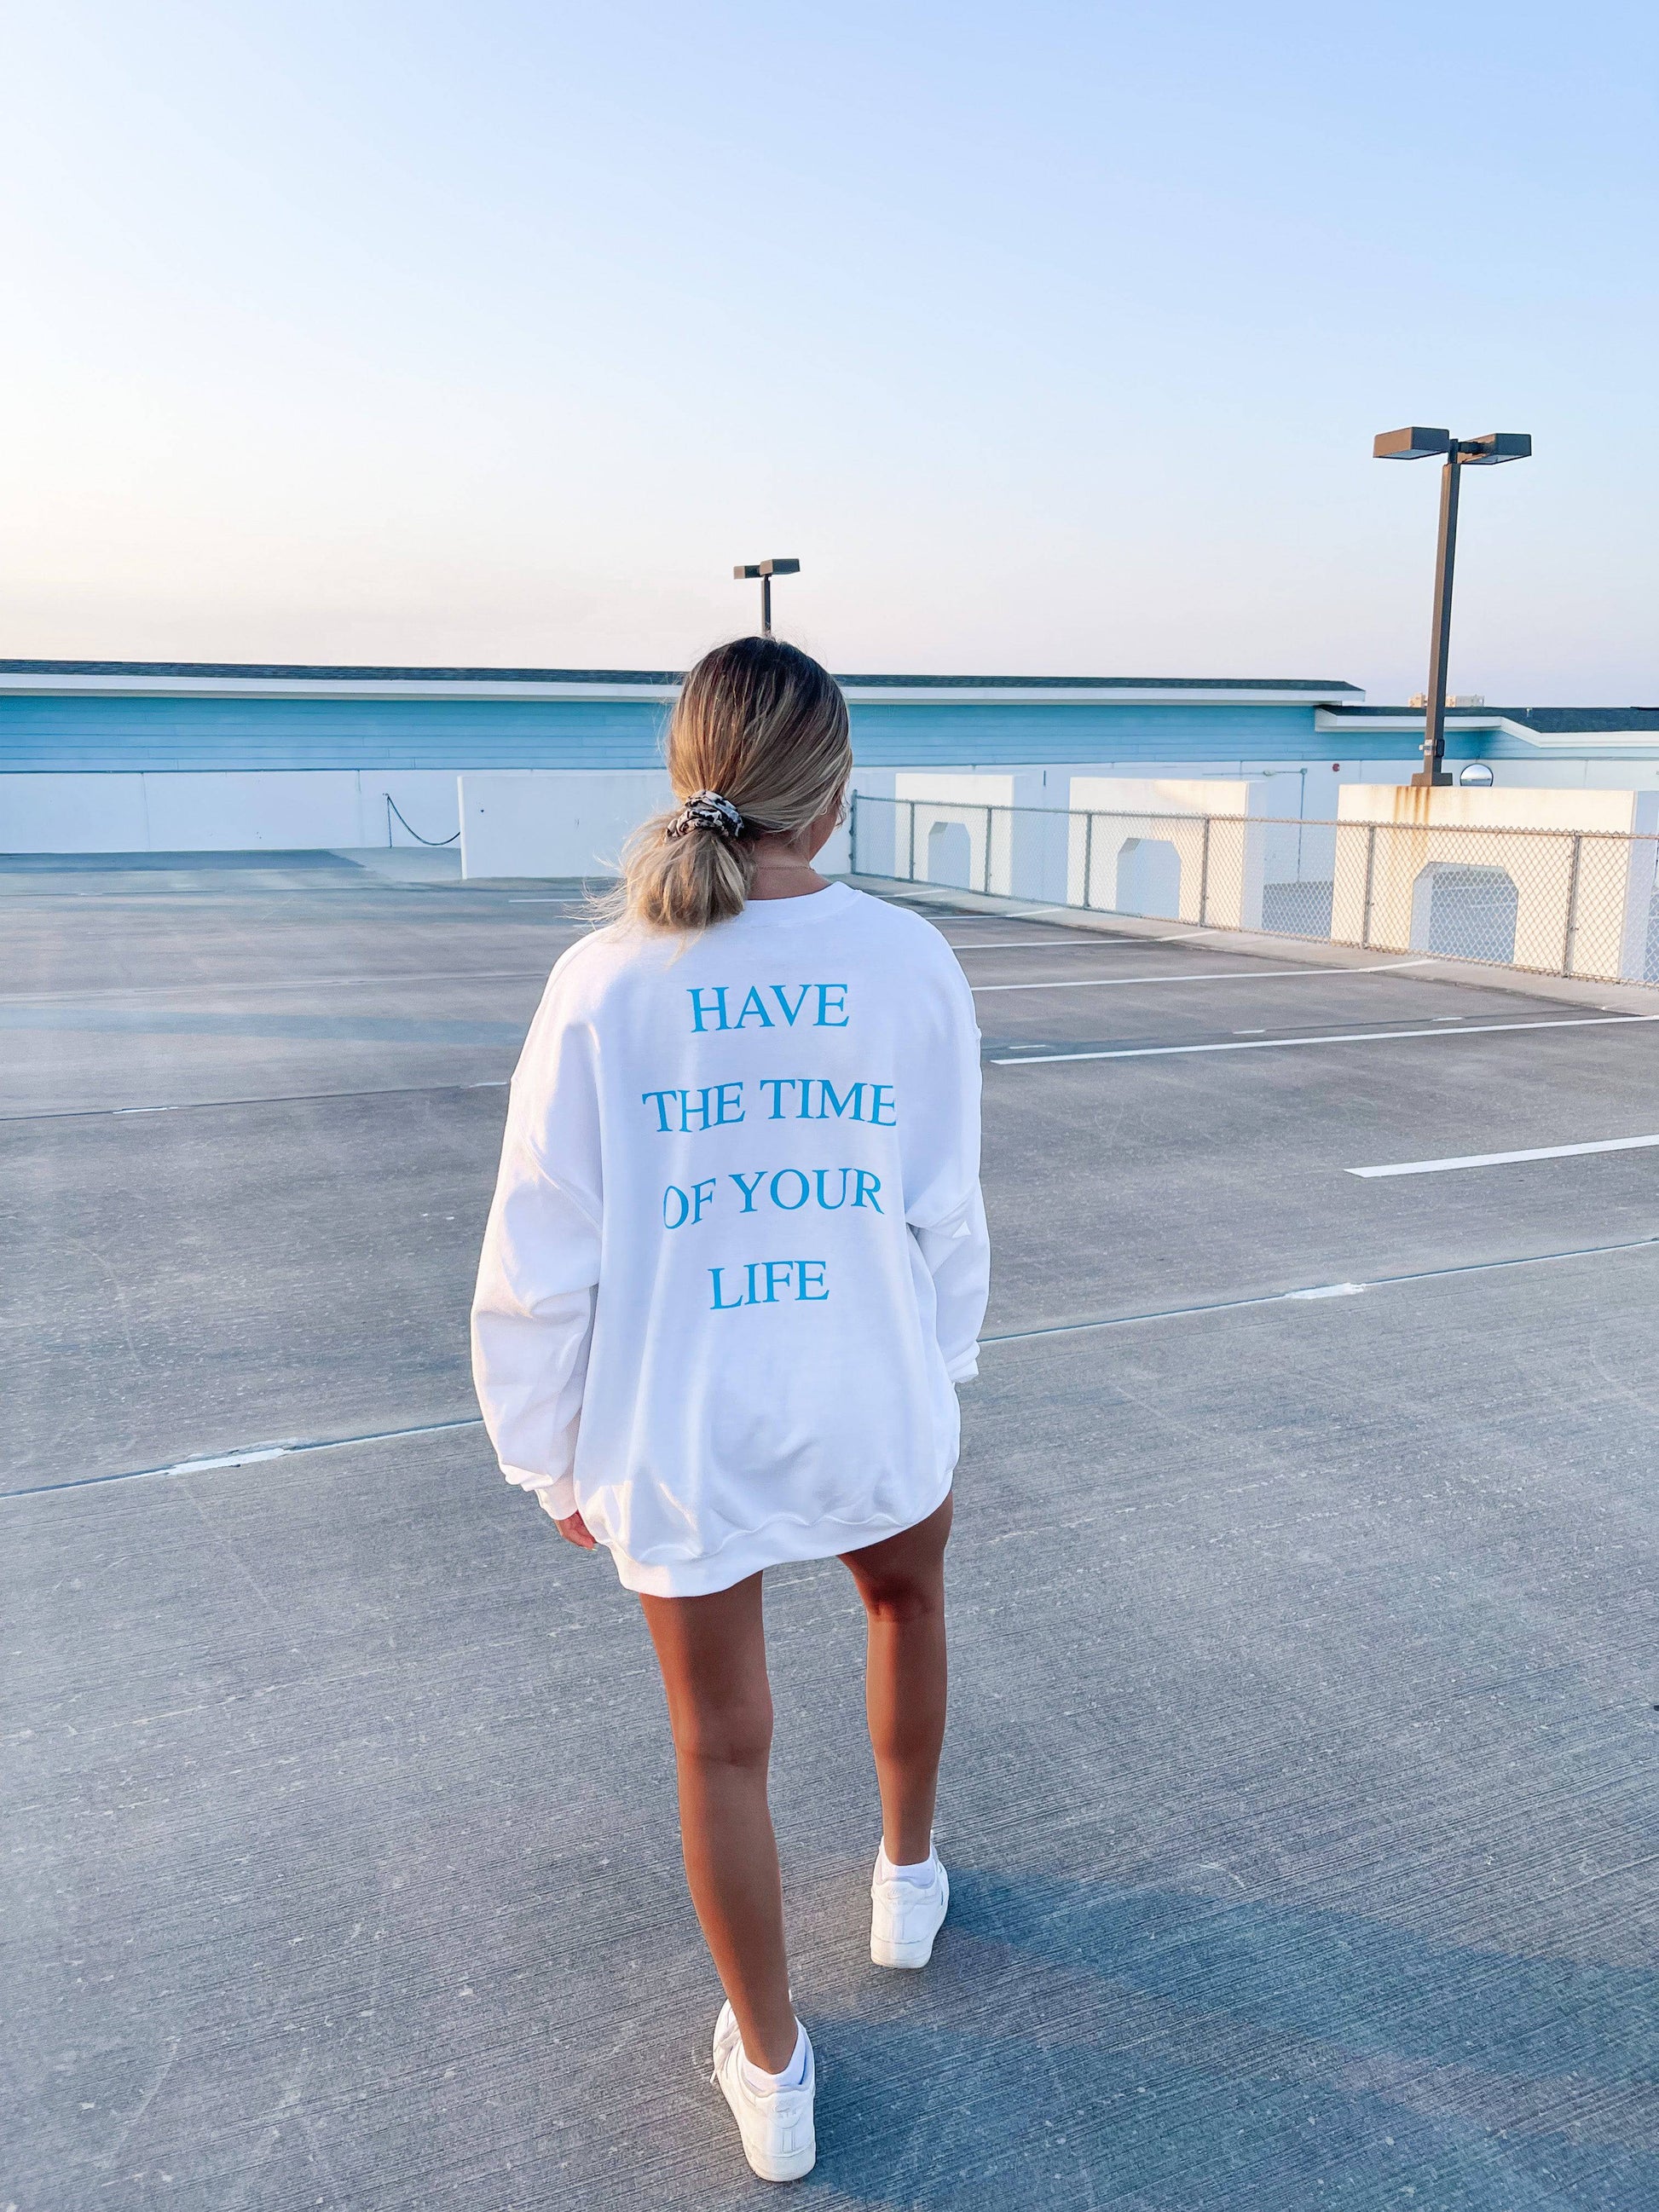 HAVE THE TIME OF YOUR LIFE CREWNECK - JEWELS KENNEDY DESIGNS